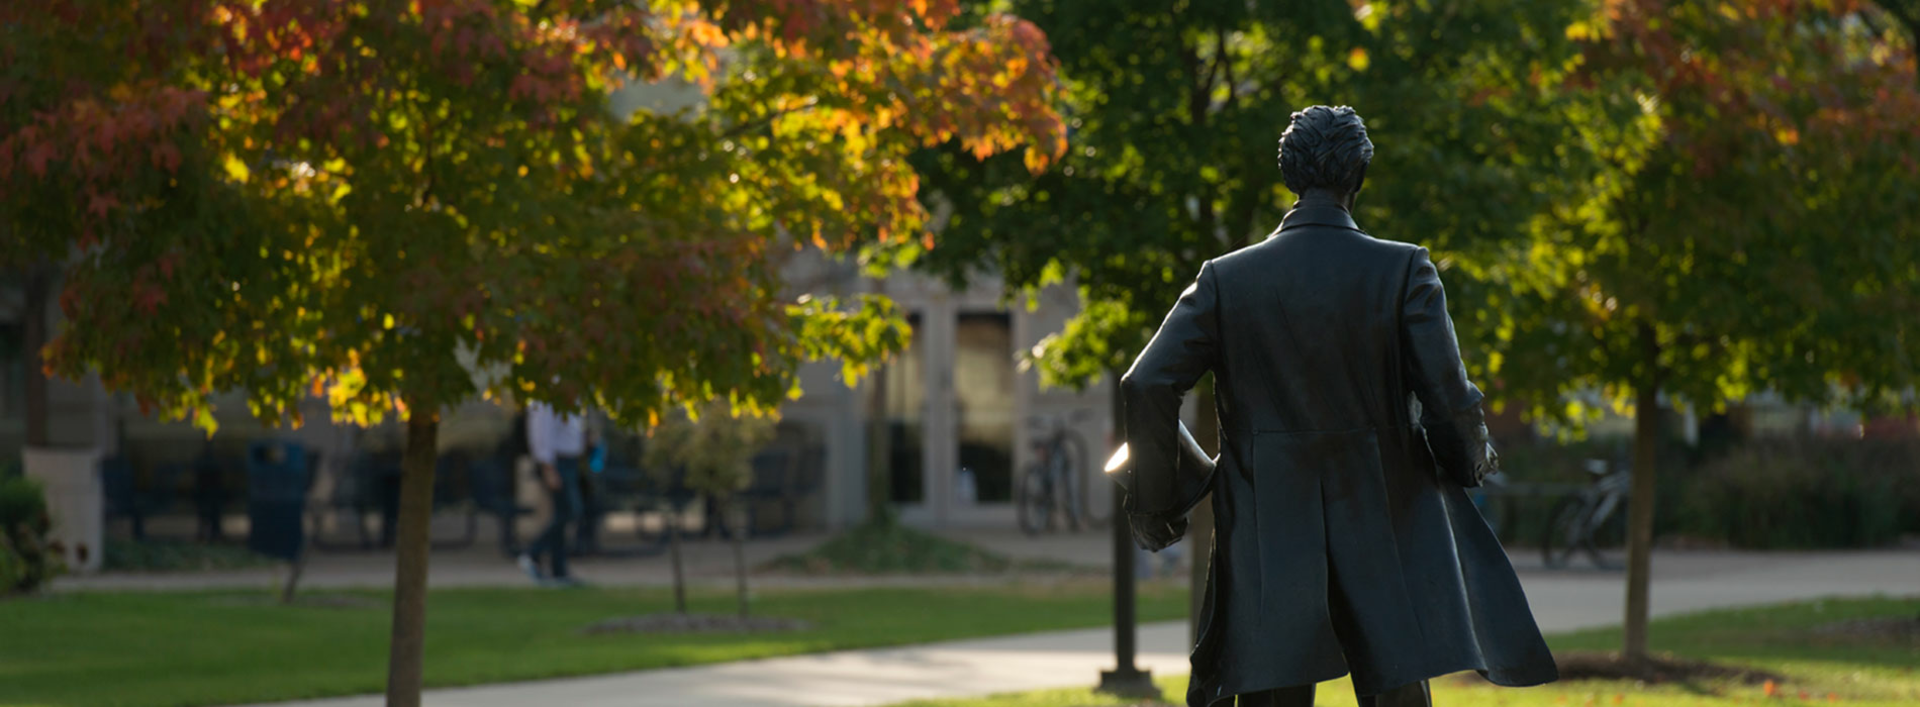 Abraham Lincoln statue on UIS campus